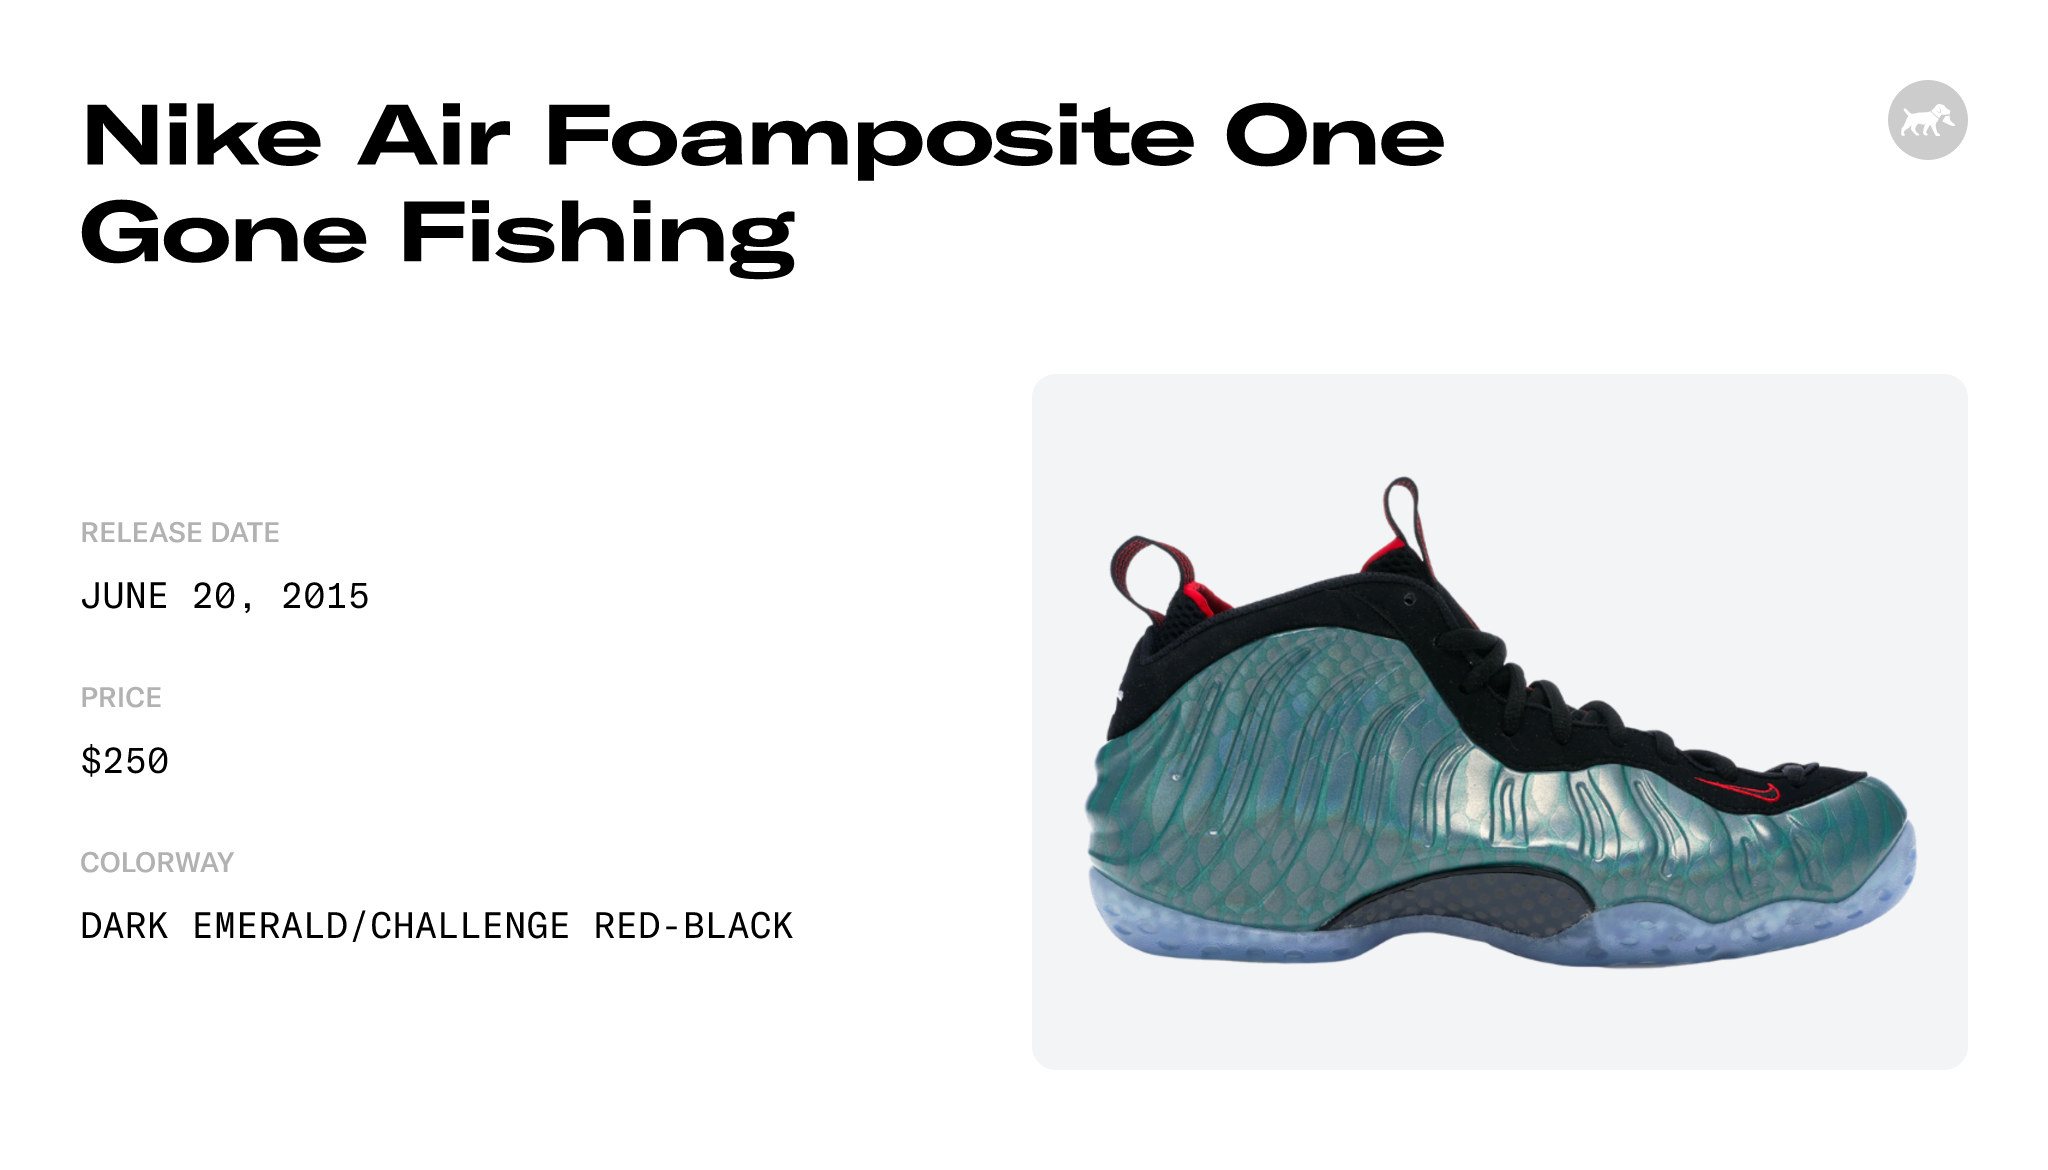 Nike Air Foamposite One Gone Fishing - 575420-300 Raffles and Release Date